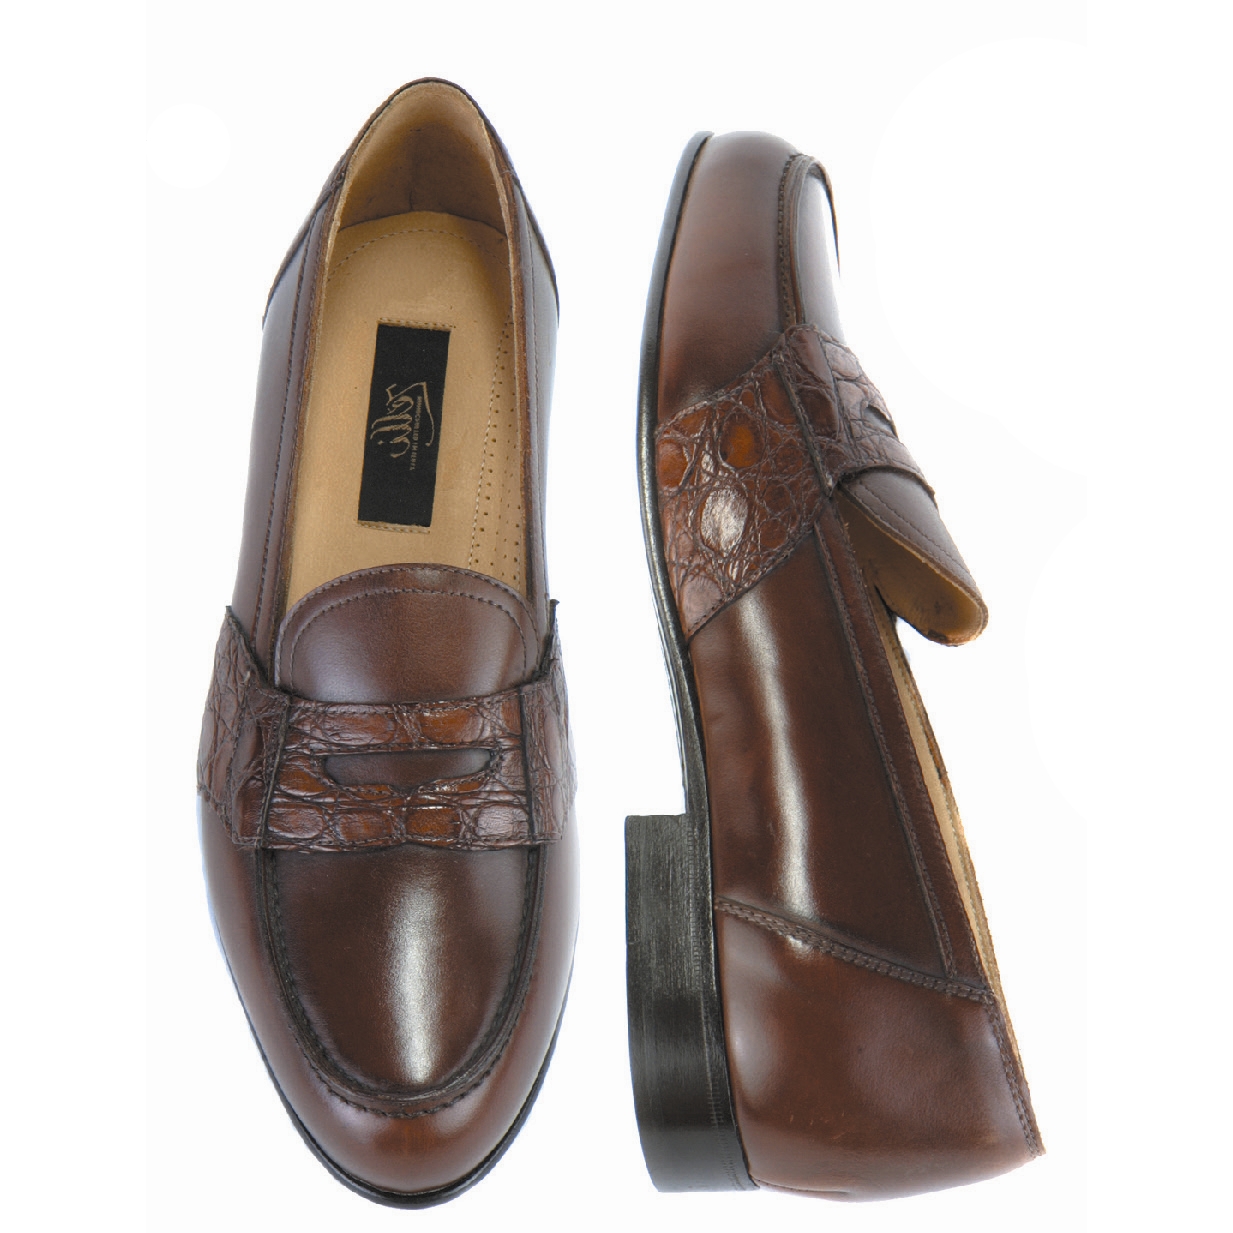 Zelli Vito Penny Loafer with Crocodile Image